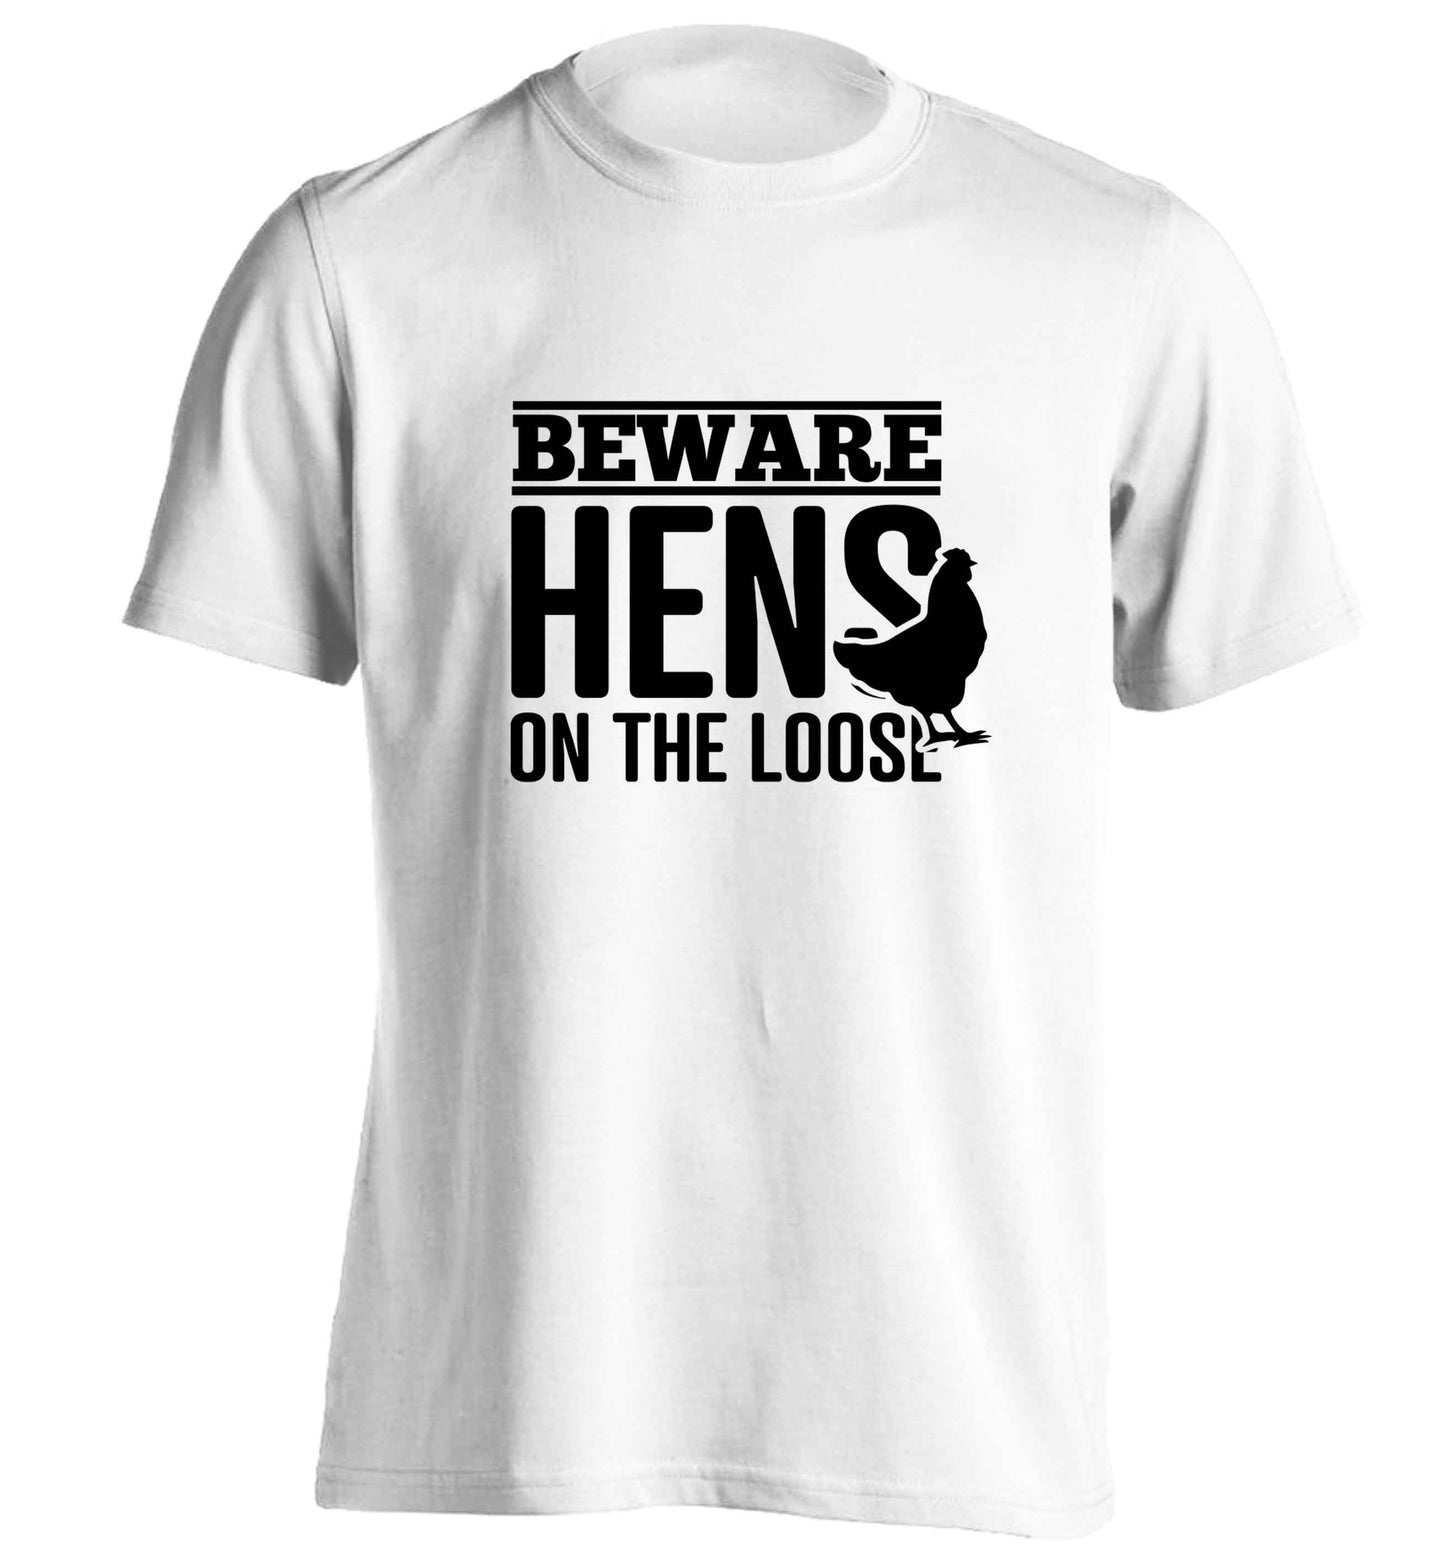 Beware hens on the loose adults unisex white Tshirt 2XL